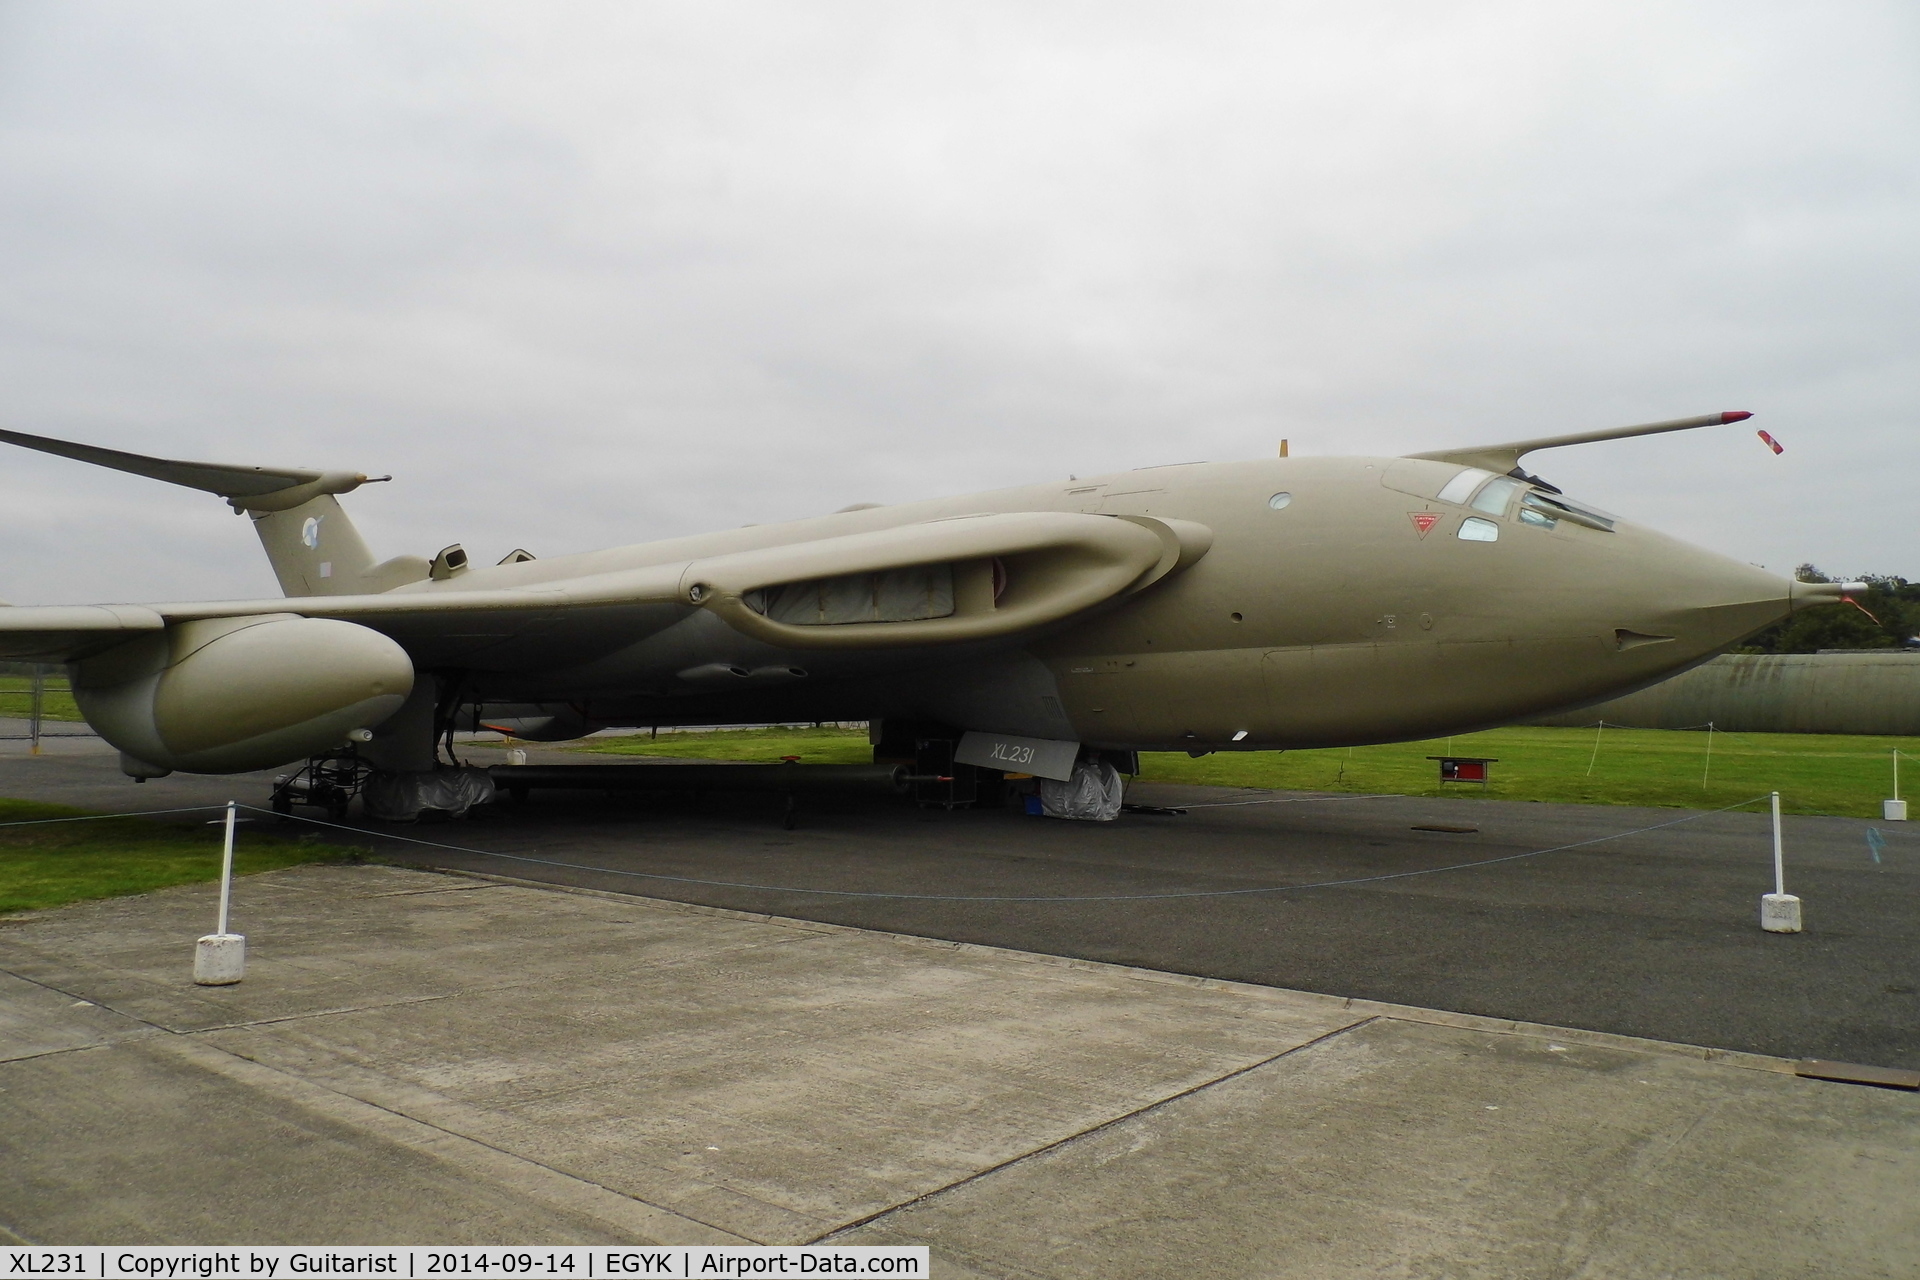 XL231, 1962 Handley Page Victor K.2 C/N HP80/76, Looks big and nasty with attitude. At the York Air Museum